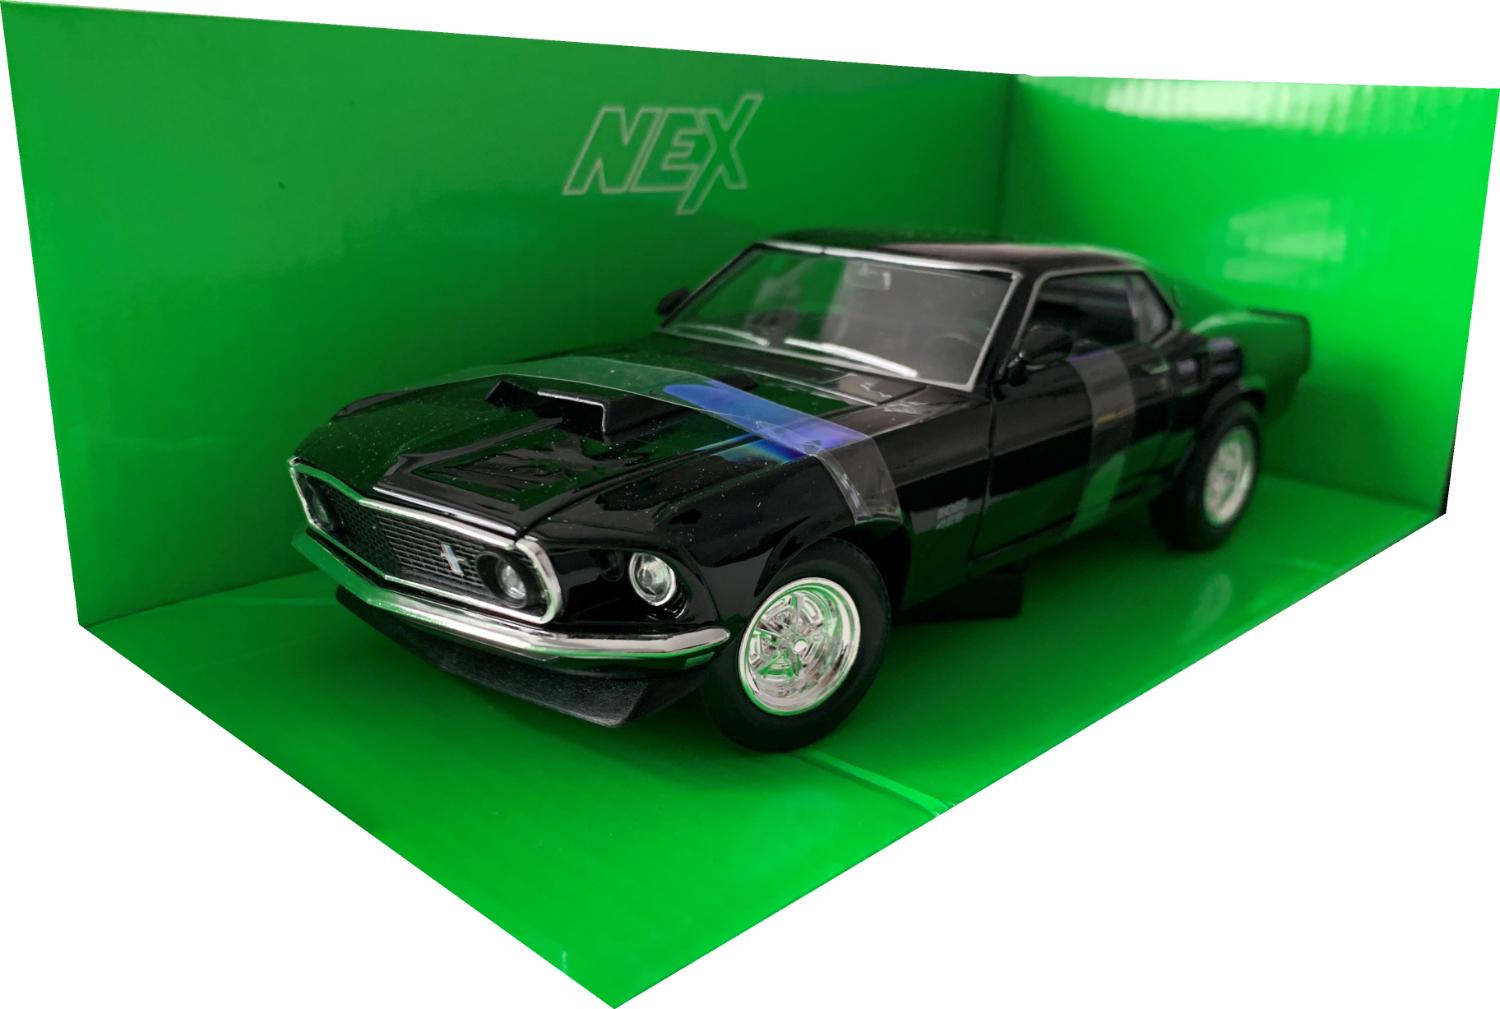 Ford Mustang Boss 429 1969 in black 1:24 scale model from Welly